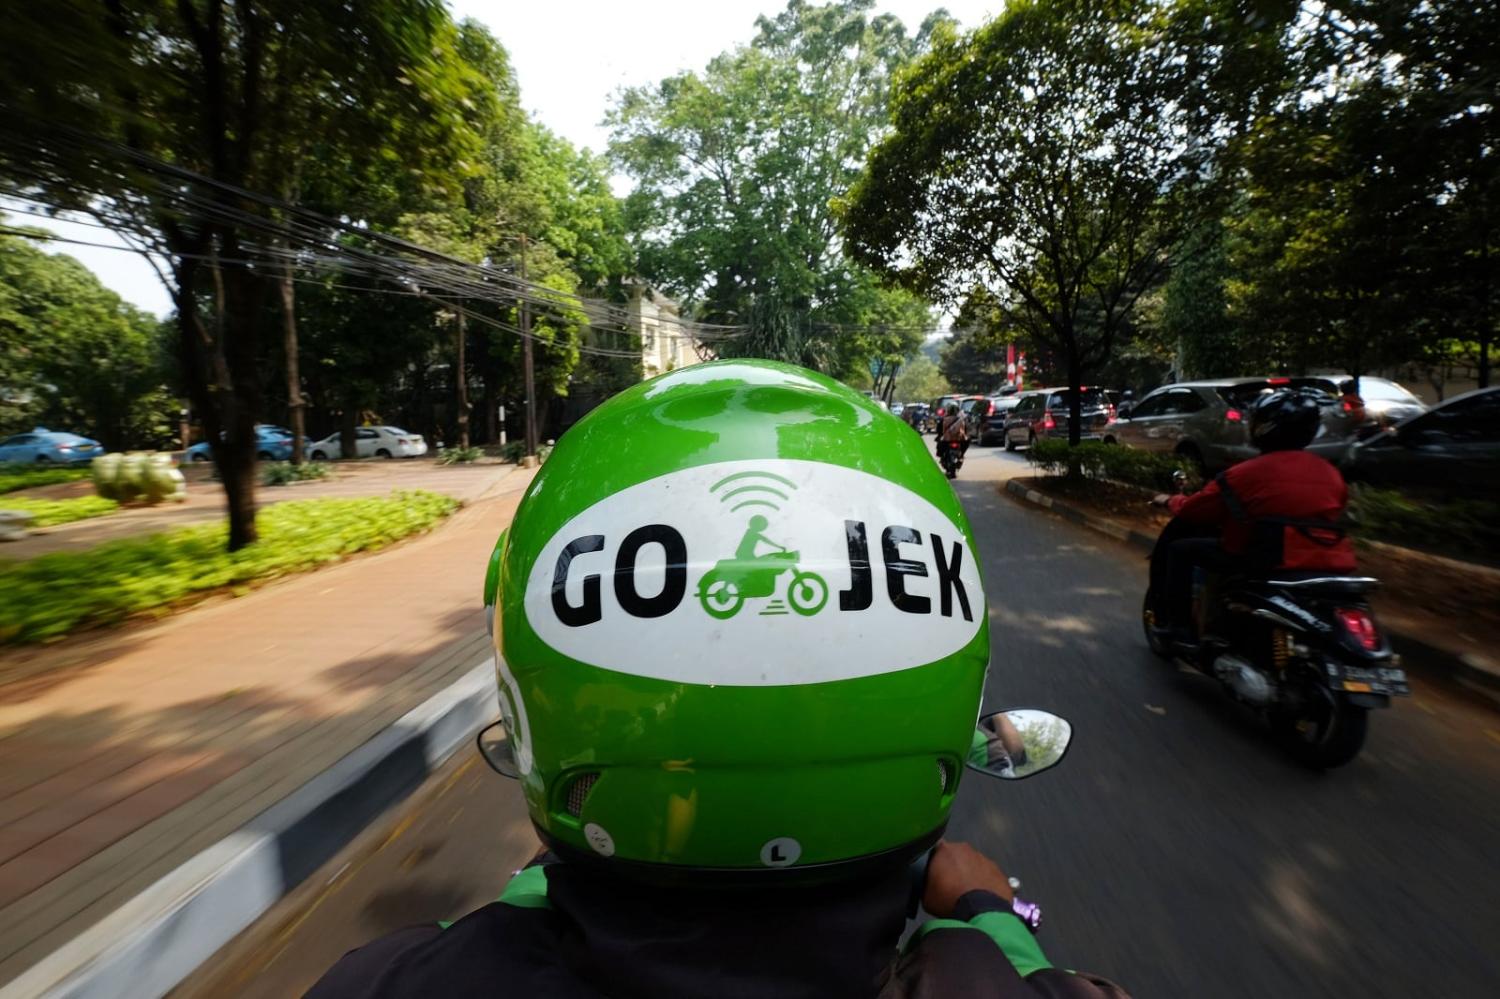 Gojek ride-share service provides transportation, courier, food delivery and shopping services in Indonesia (Dimas Ardian/Bloomberg via Getty Images)